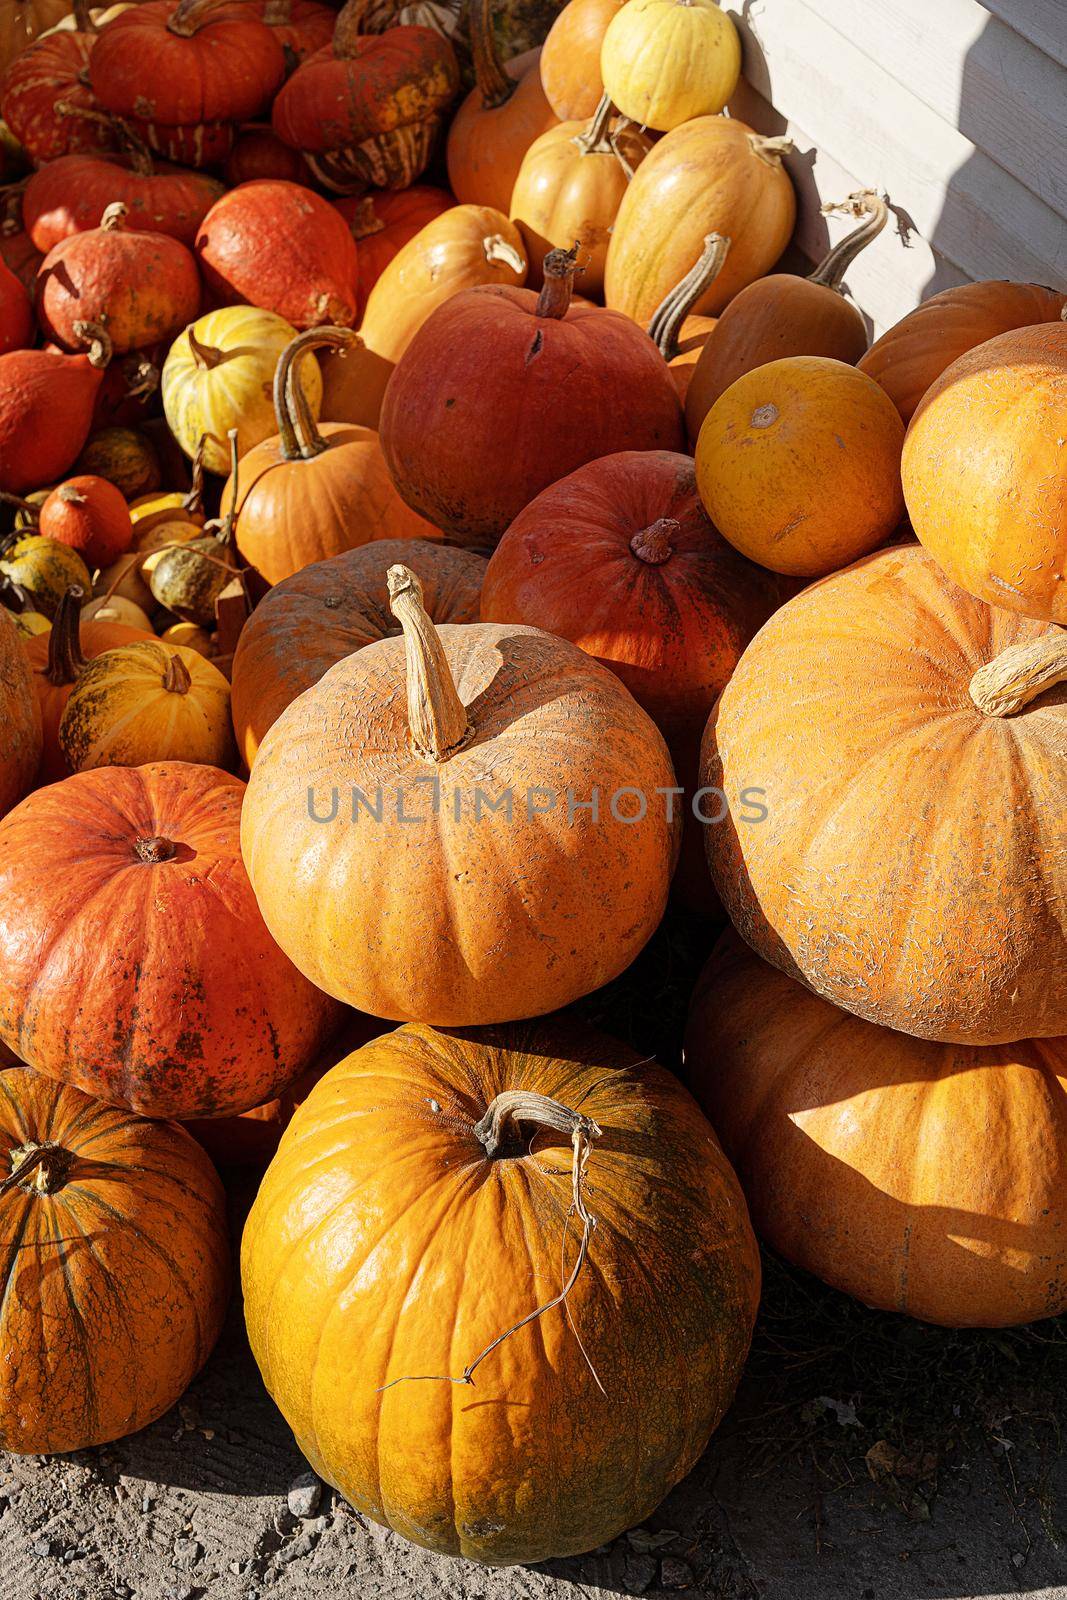 Lots of Pumpkins in the Farm Market. Pumpkin Pile of Fairytale, Cinderella and Jack-be-little. Close-up. Pumpkin Background. High quality photo